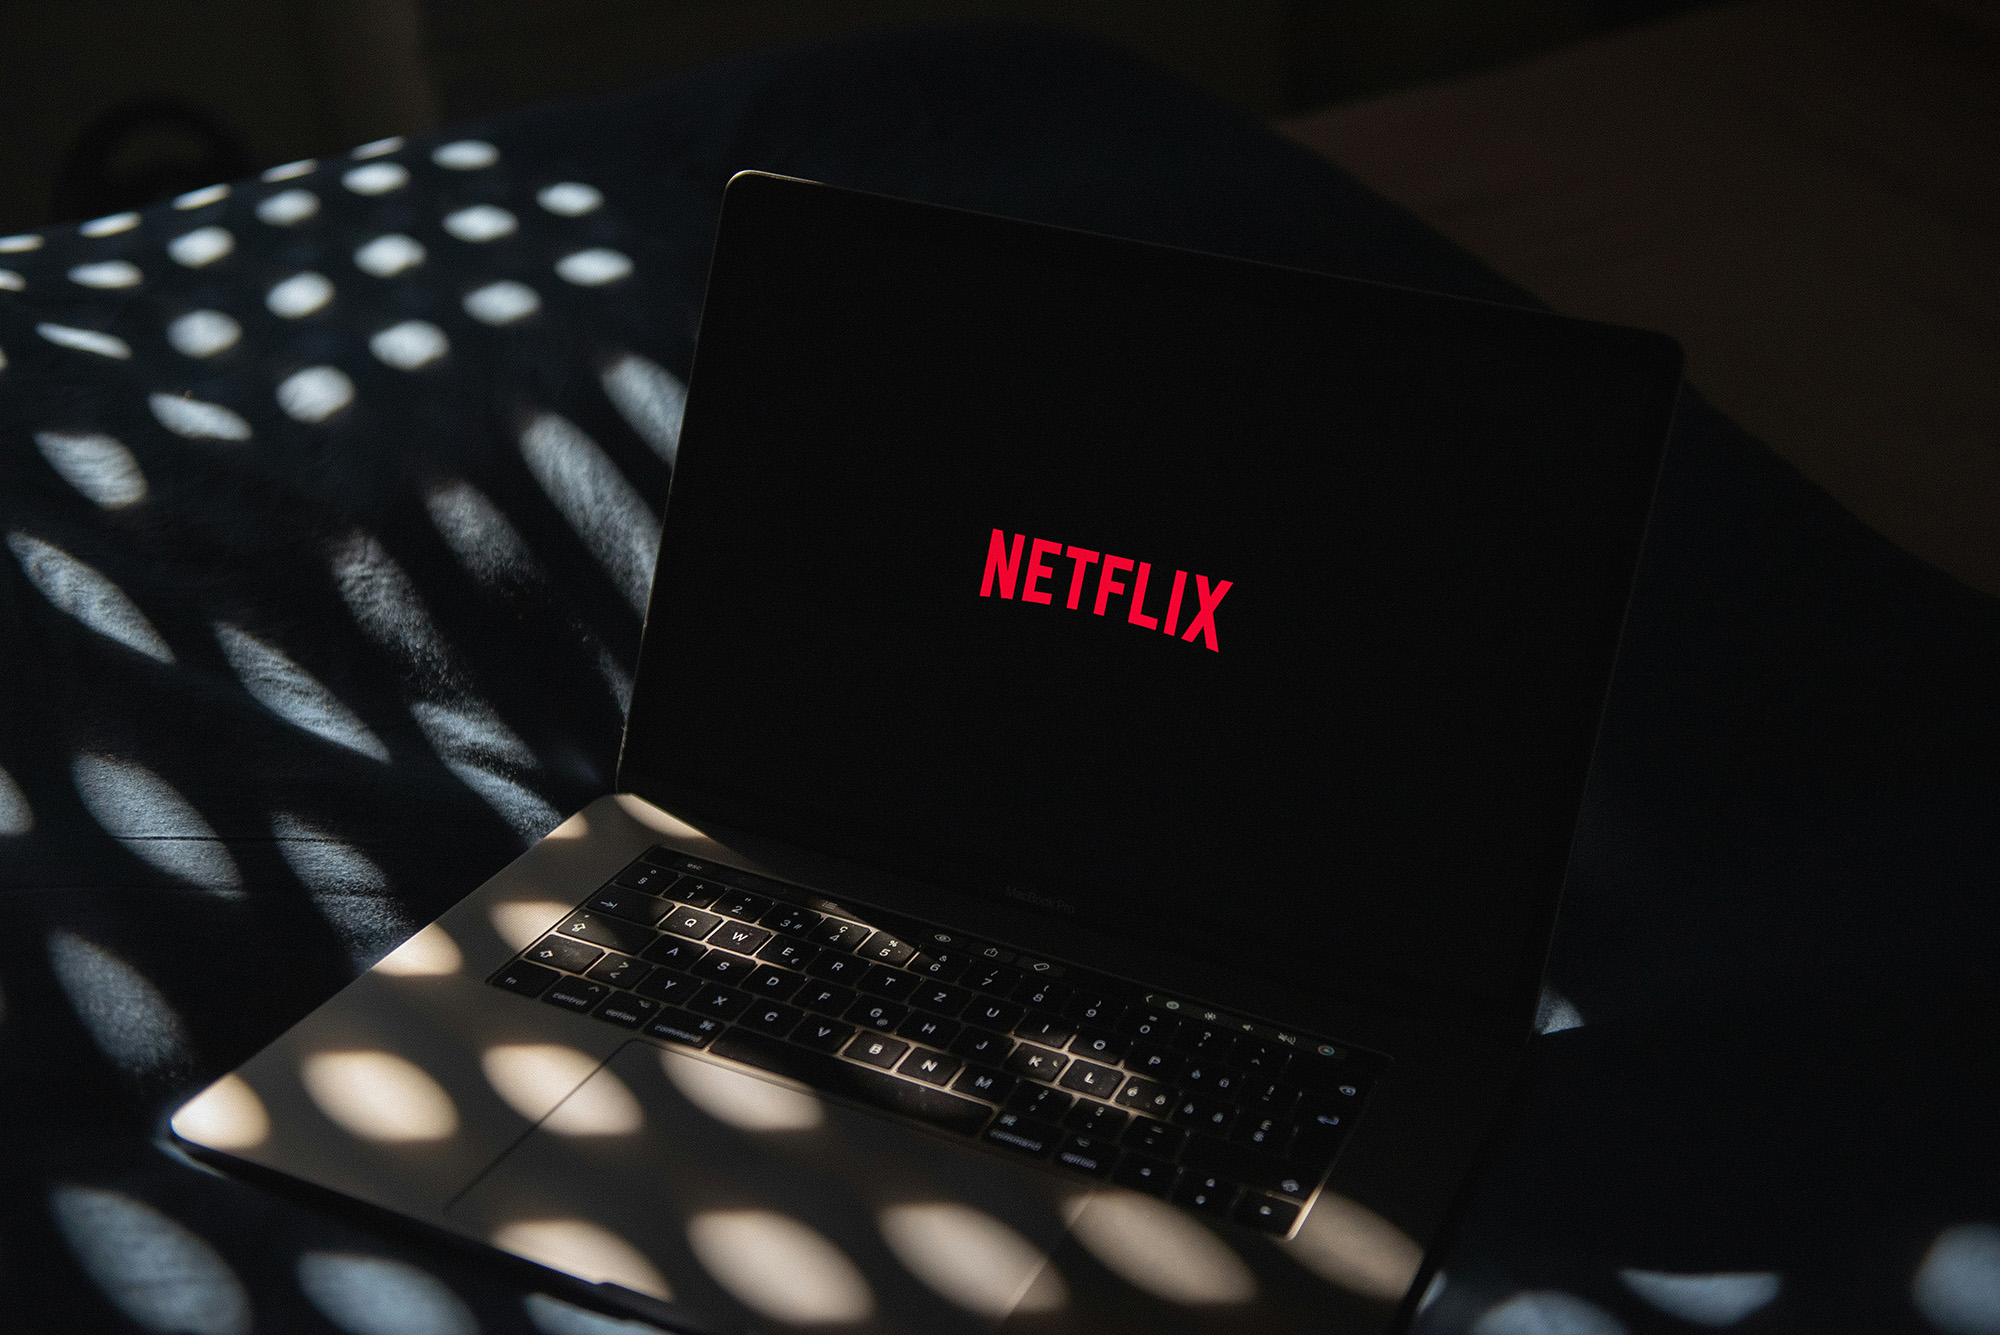 Instead of competing, the big three streaming providers are teaming up against Netflix